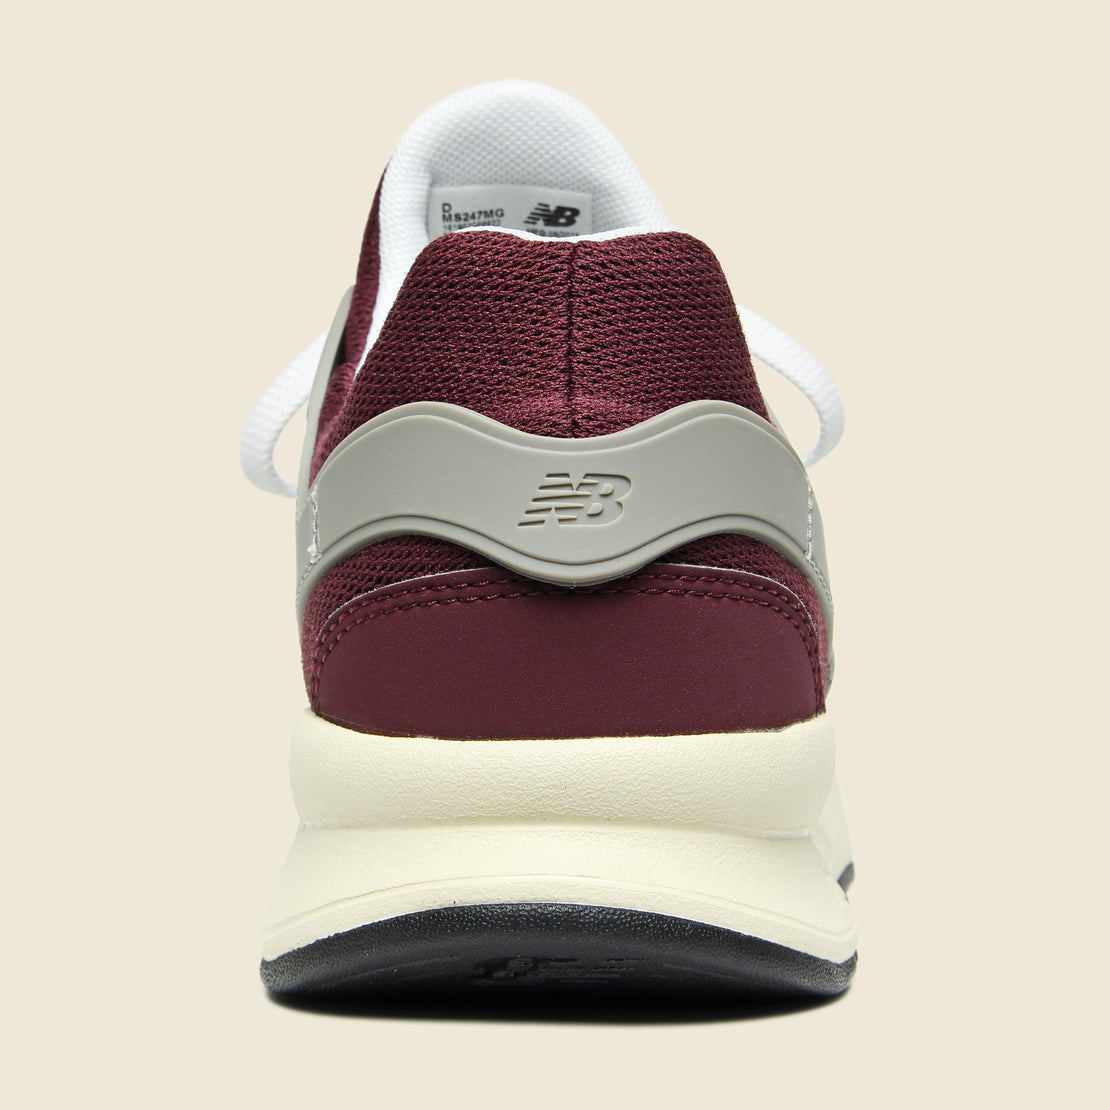 247 Sneaker - Burgundy - New Balance - STAG Provisions - Shoes - Athletic